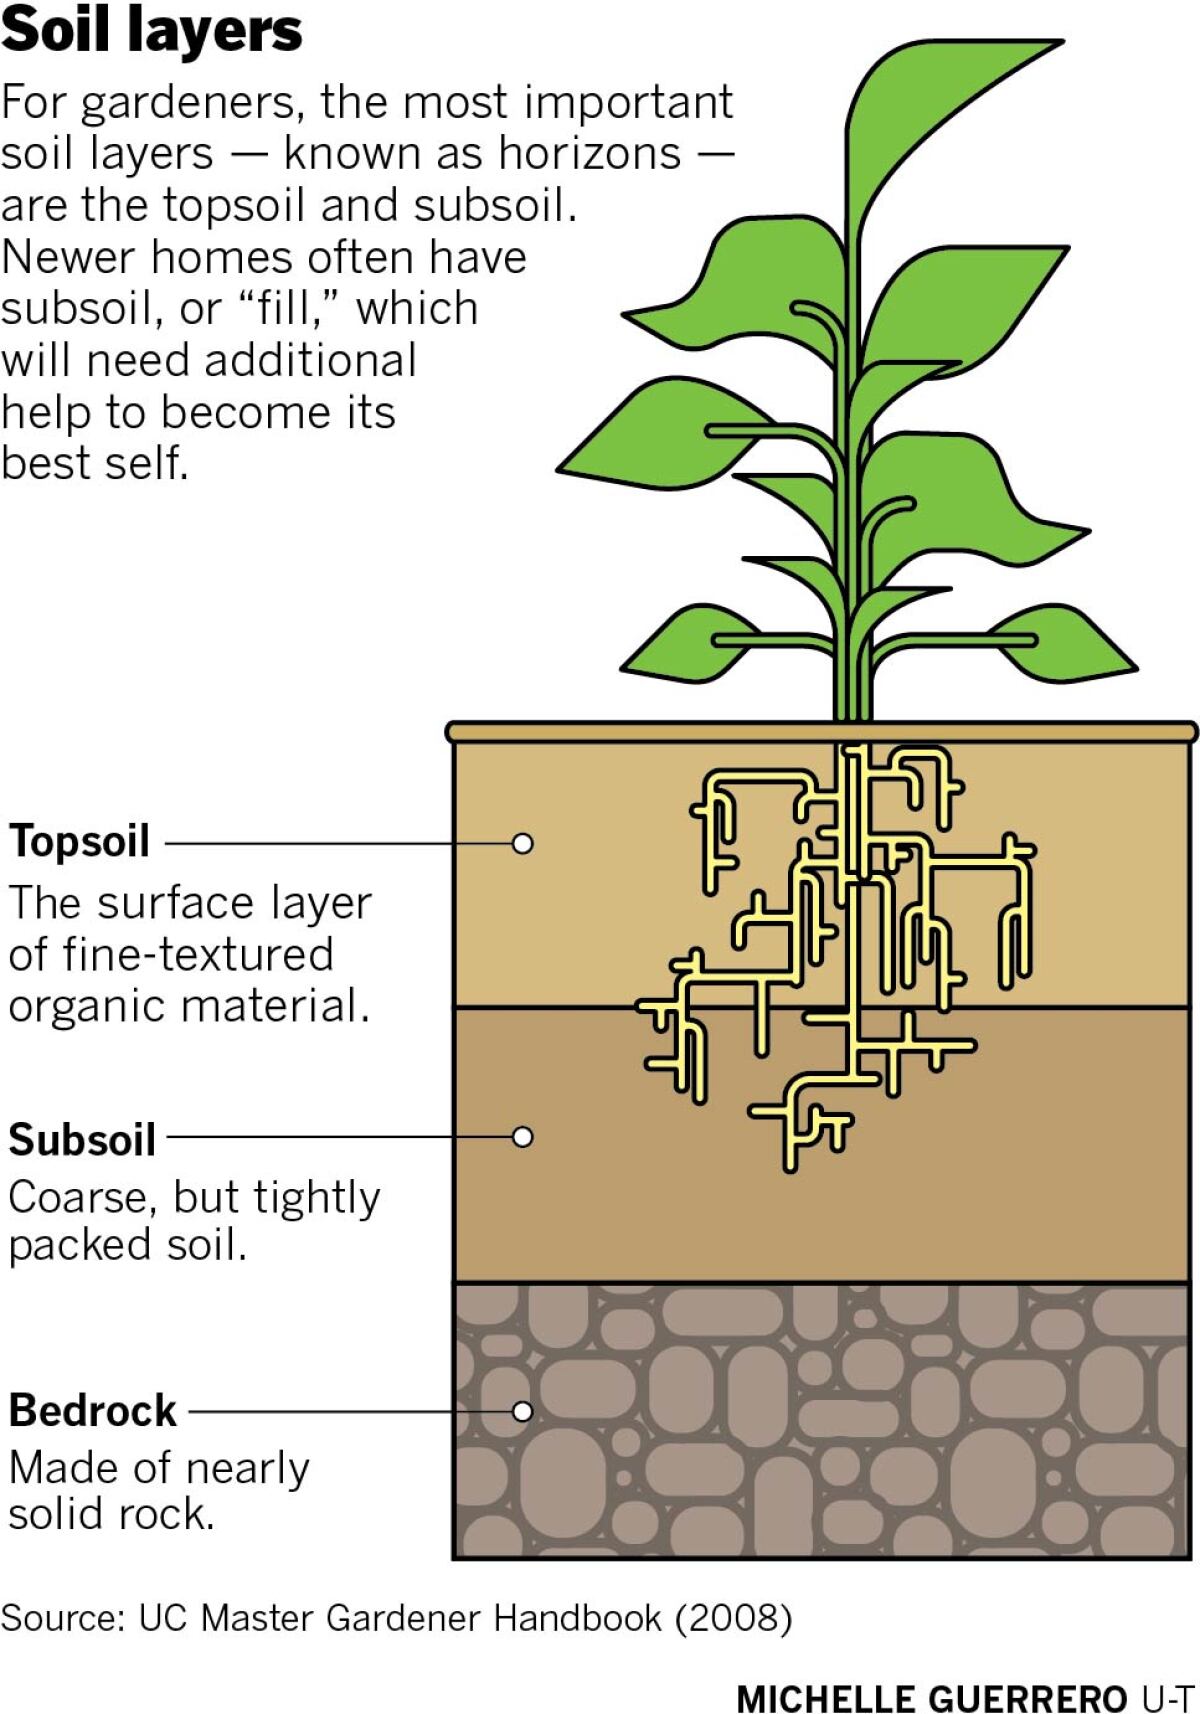 Soil layers graphic